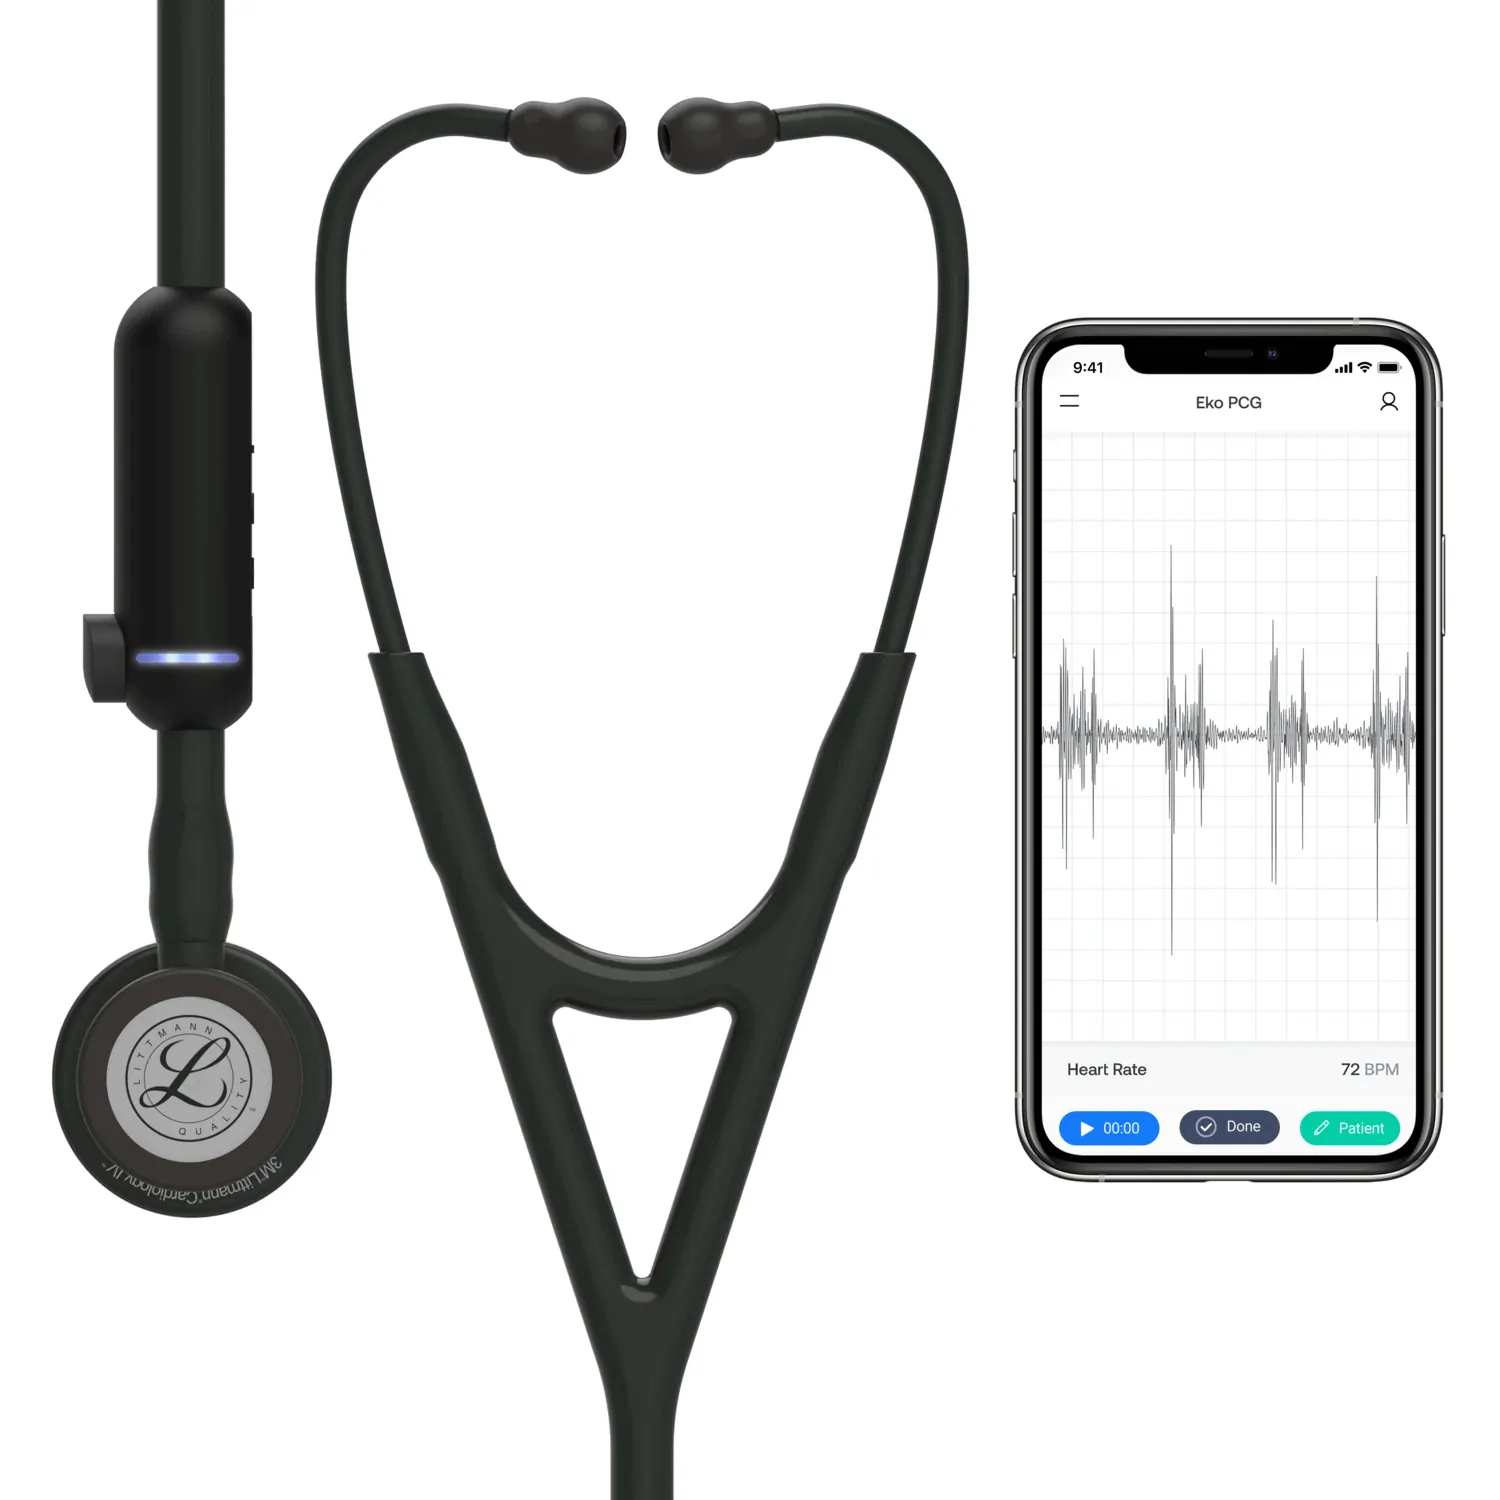 Electronic Stethoscope - How to Find the Best Electronic Stethoscope for You - 3M Littmann CORE Stethoscope 8480 05 digital compare all HR